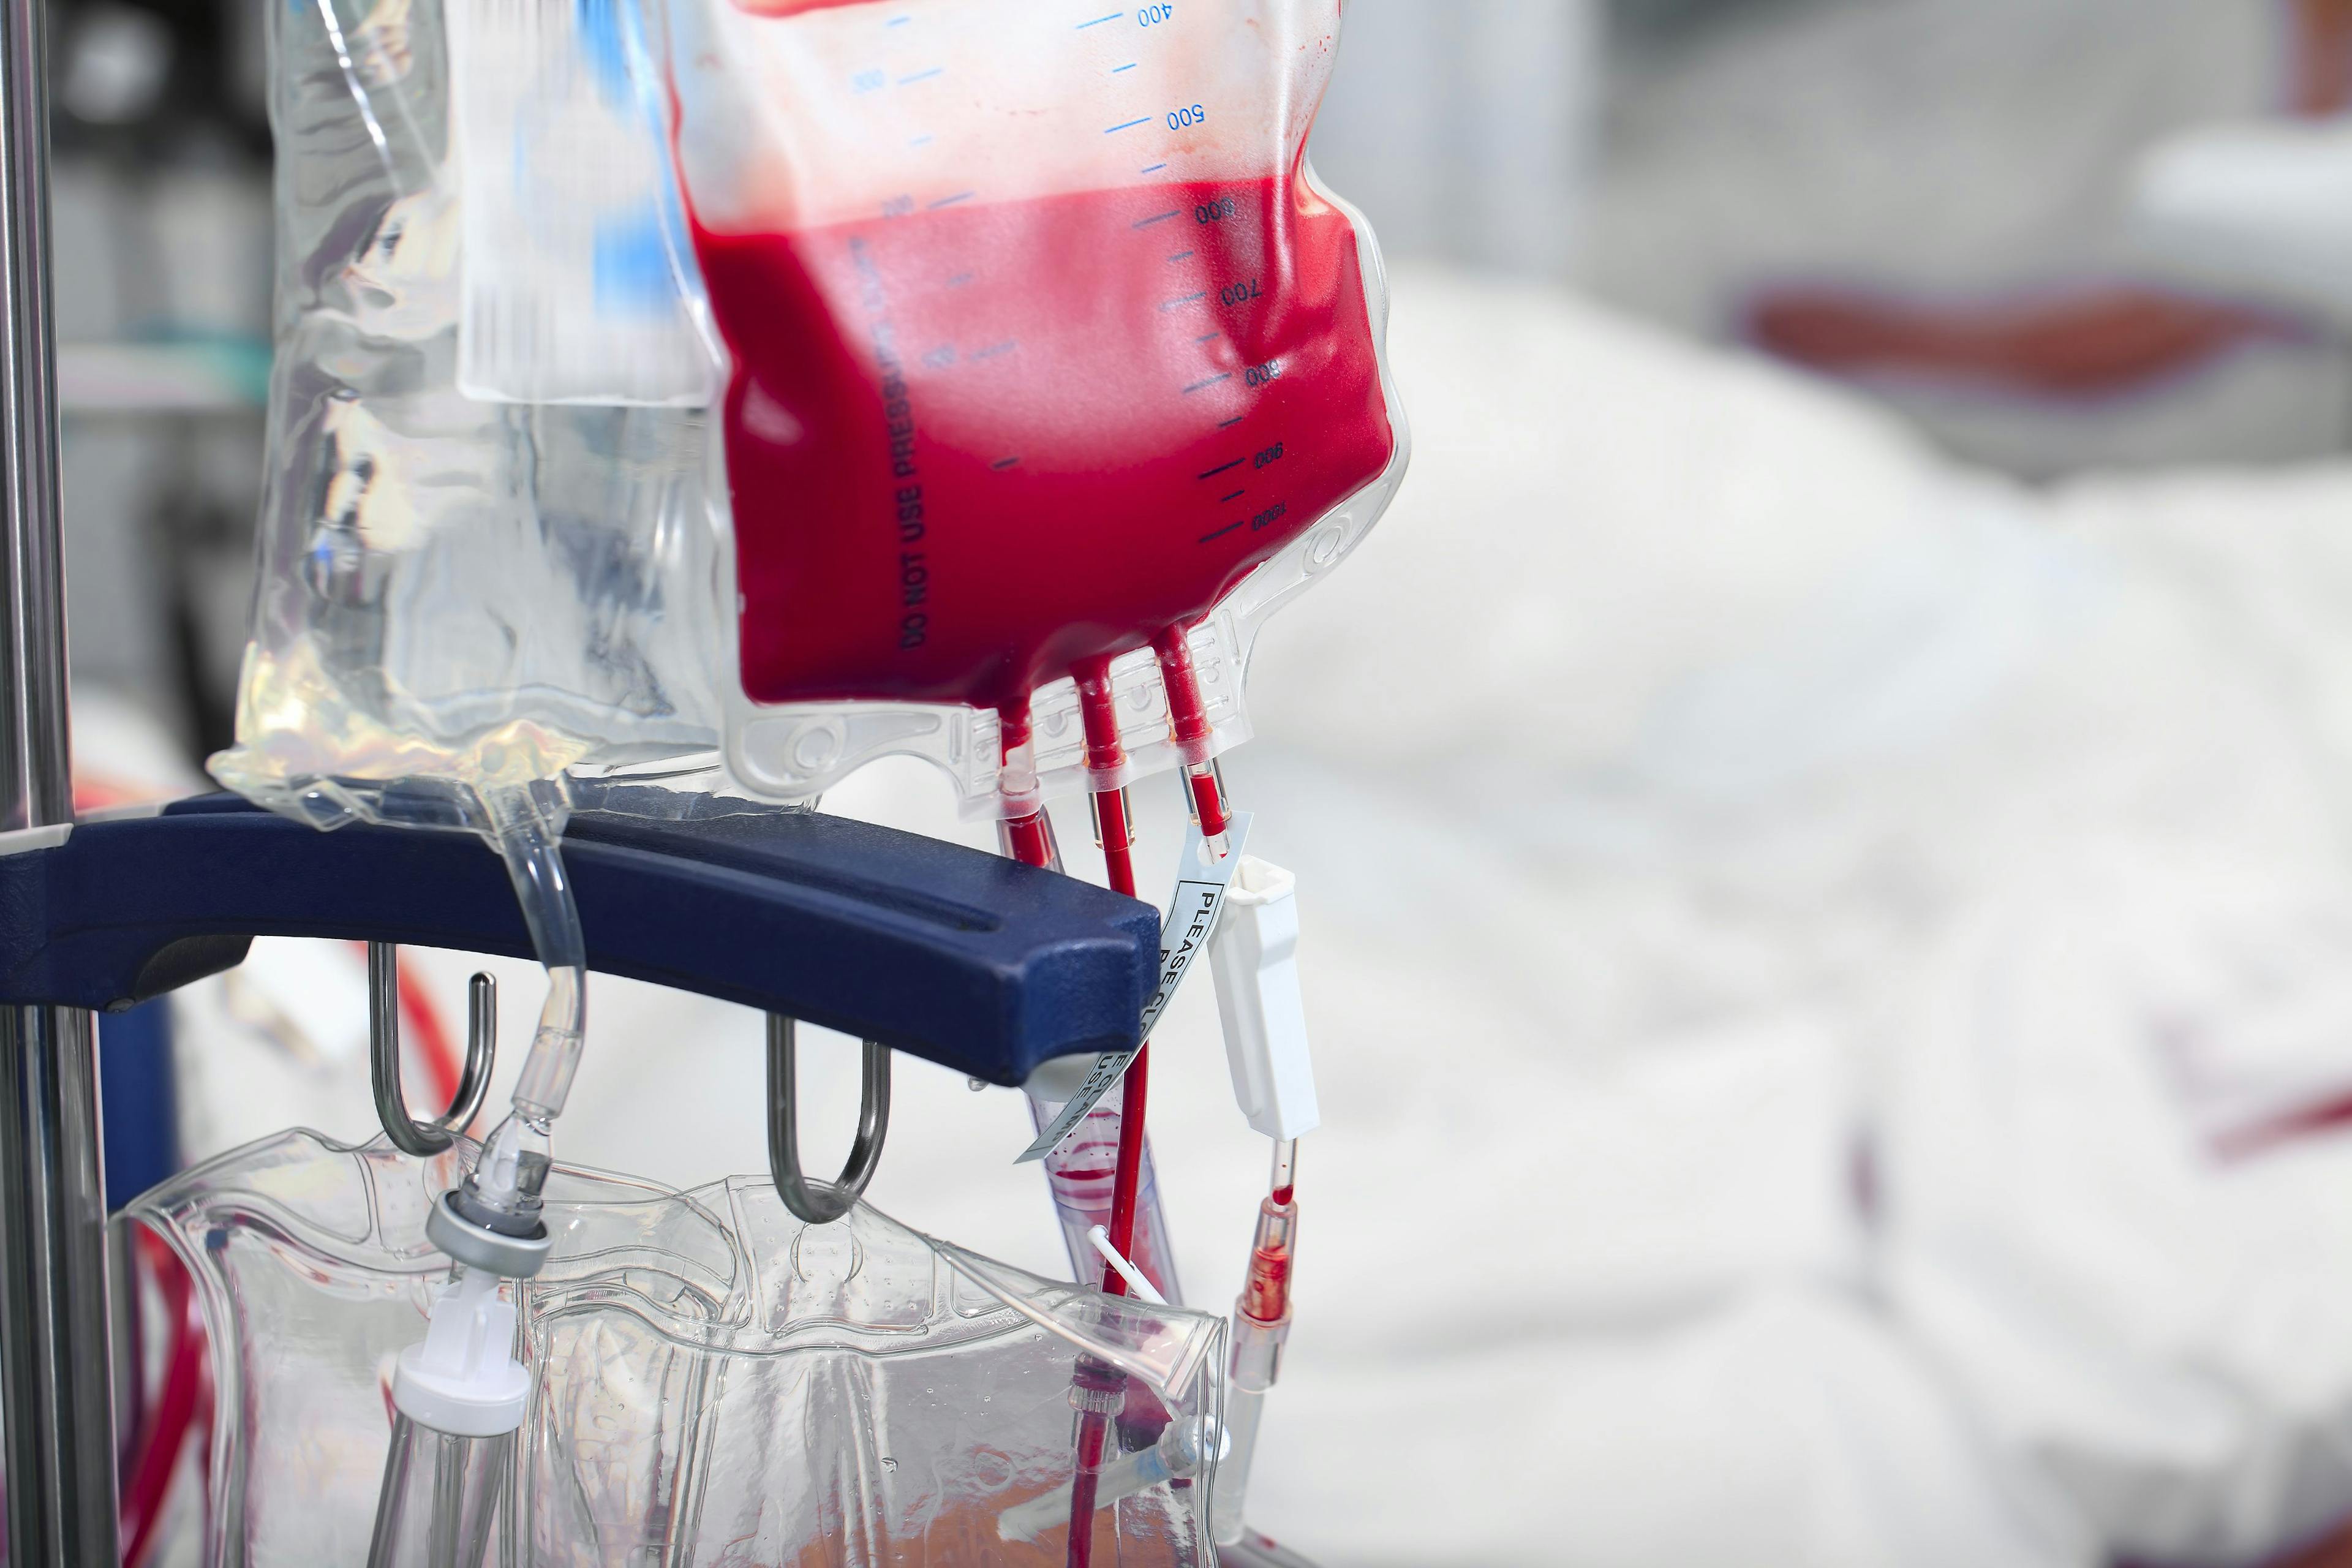 During National Blood Shortage, Nurses’ Efforts Can Make All the Difference